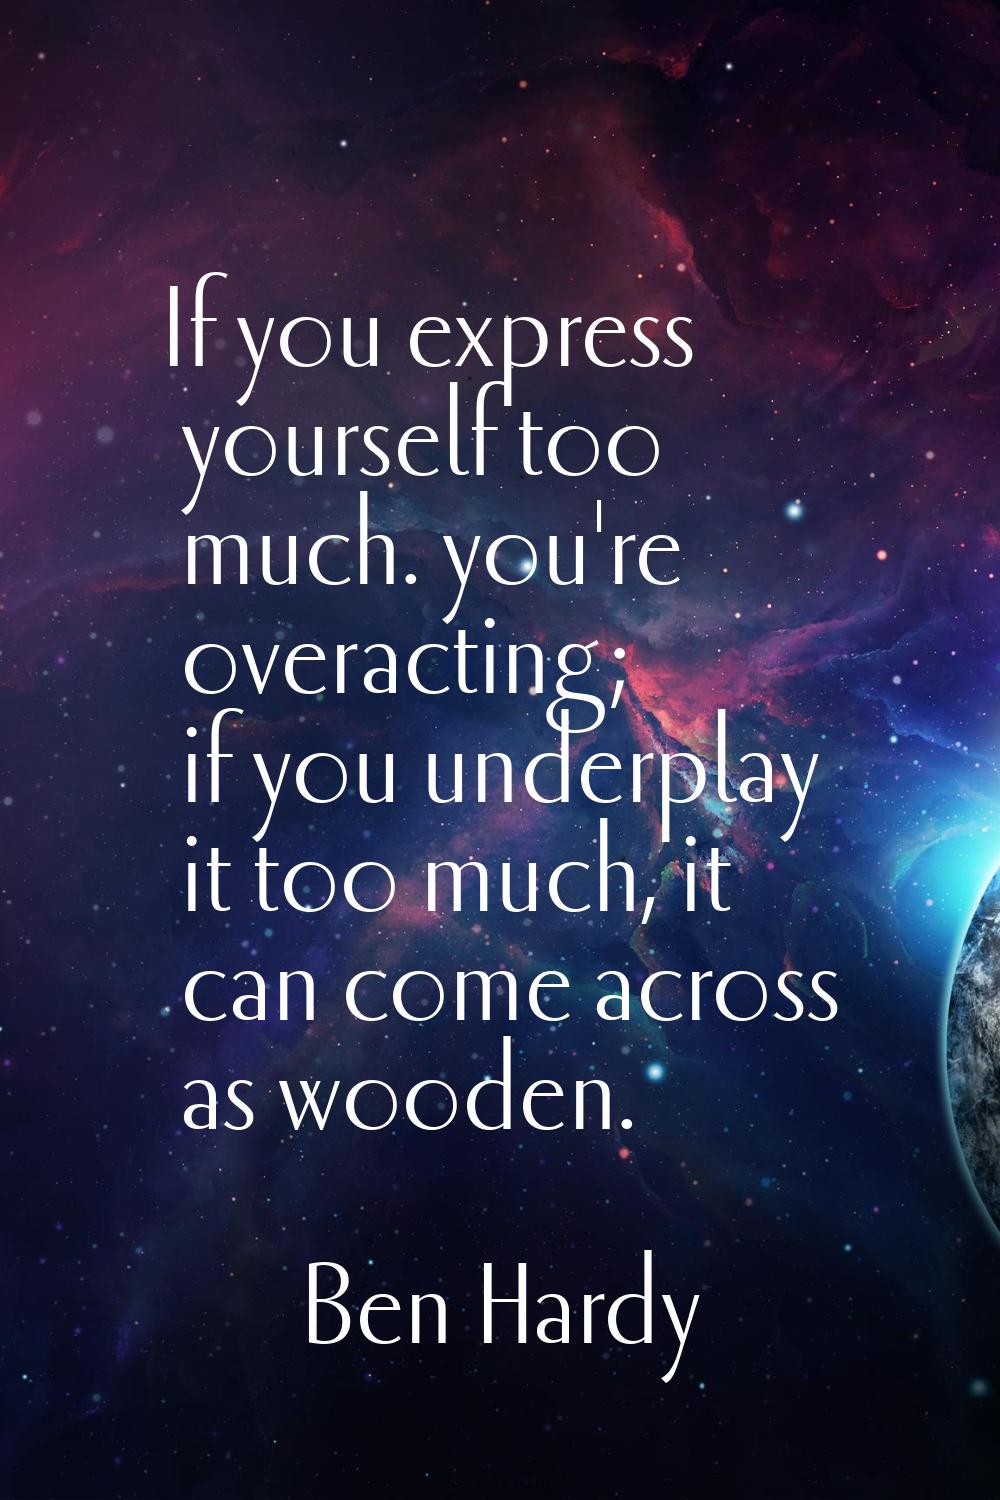 If you express yourself too much. you're overacting; if you underplay it too much, it can come acro